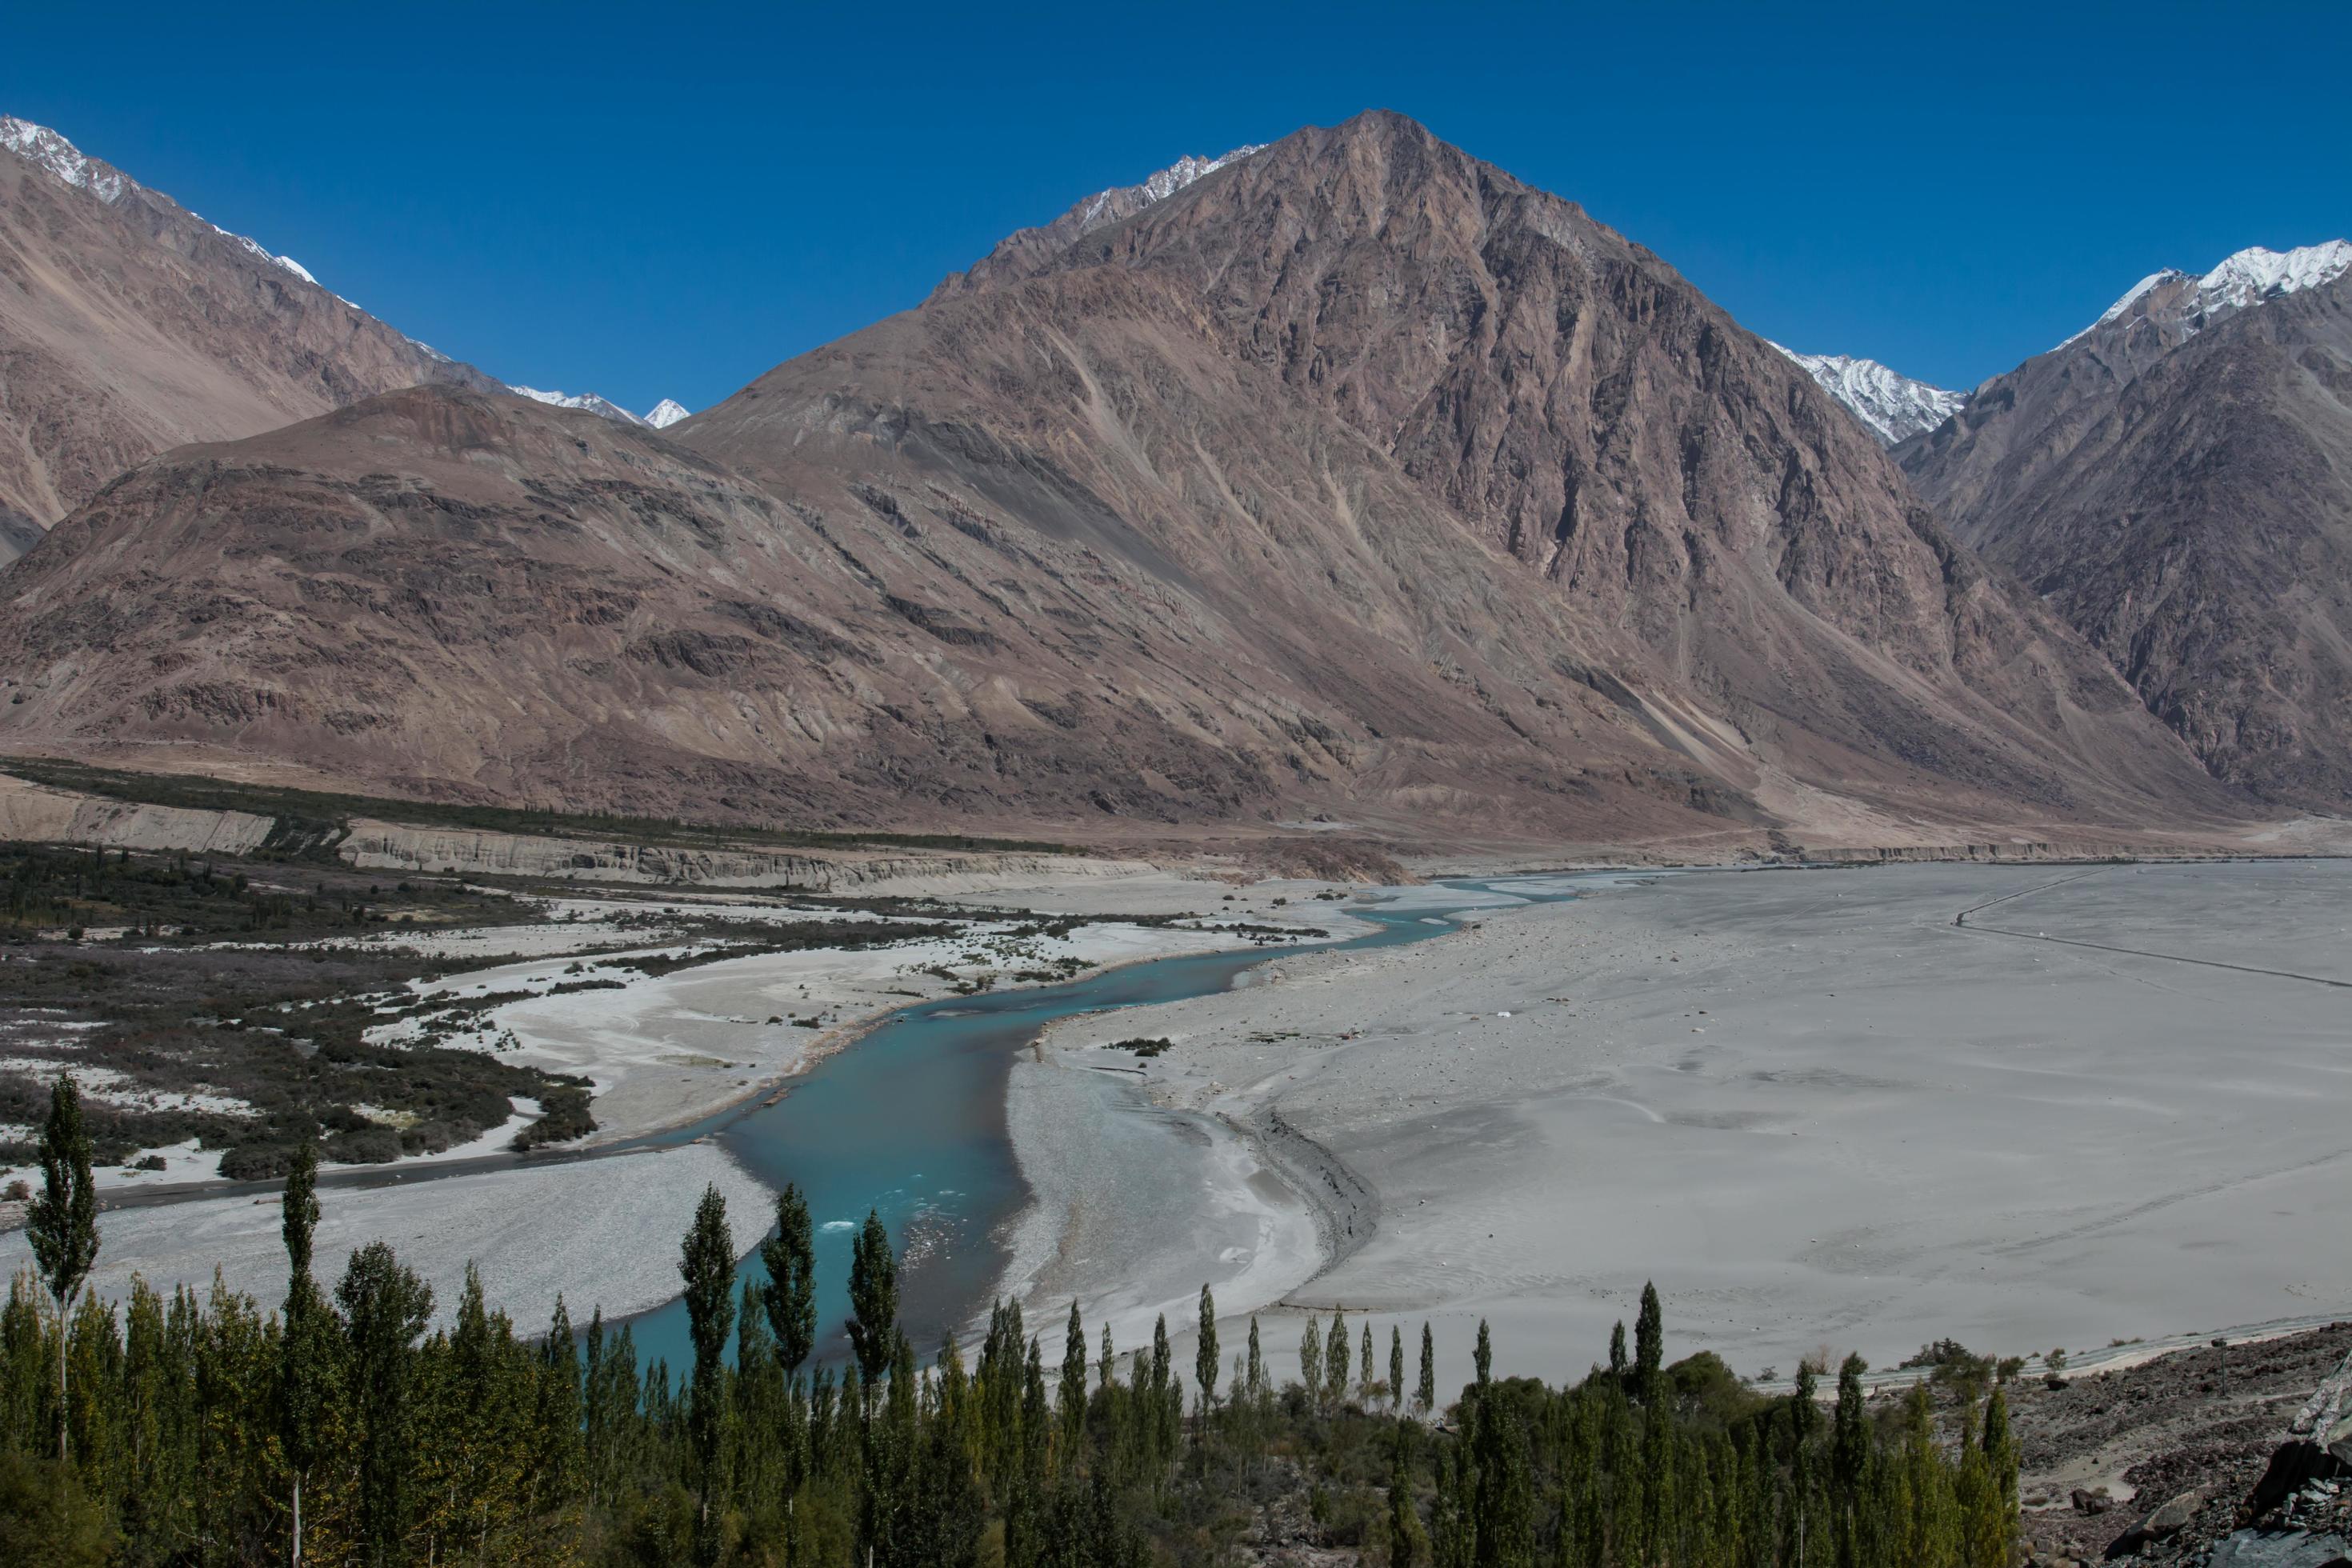 https://static.vecteezy.com/system/resources/previews/012/235/049/large_2x/nubra-valley-in-ladakh-free-photo.jpg